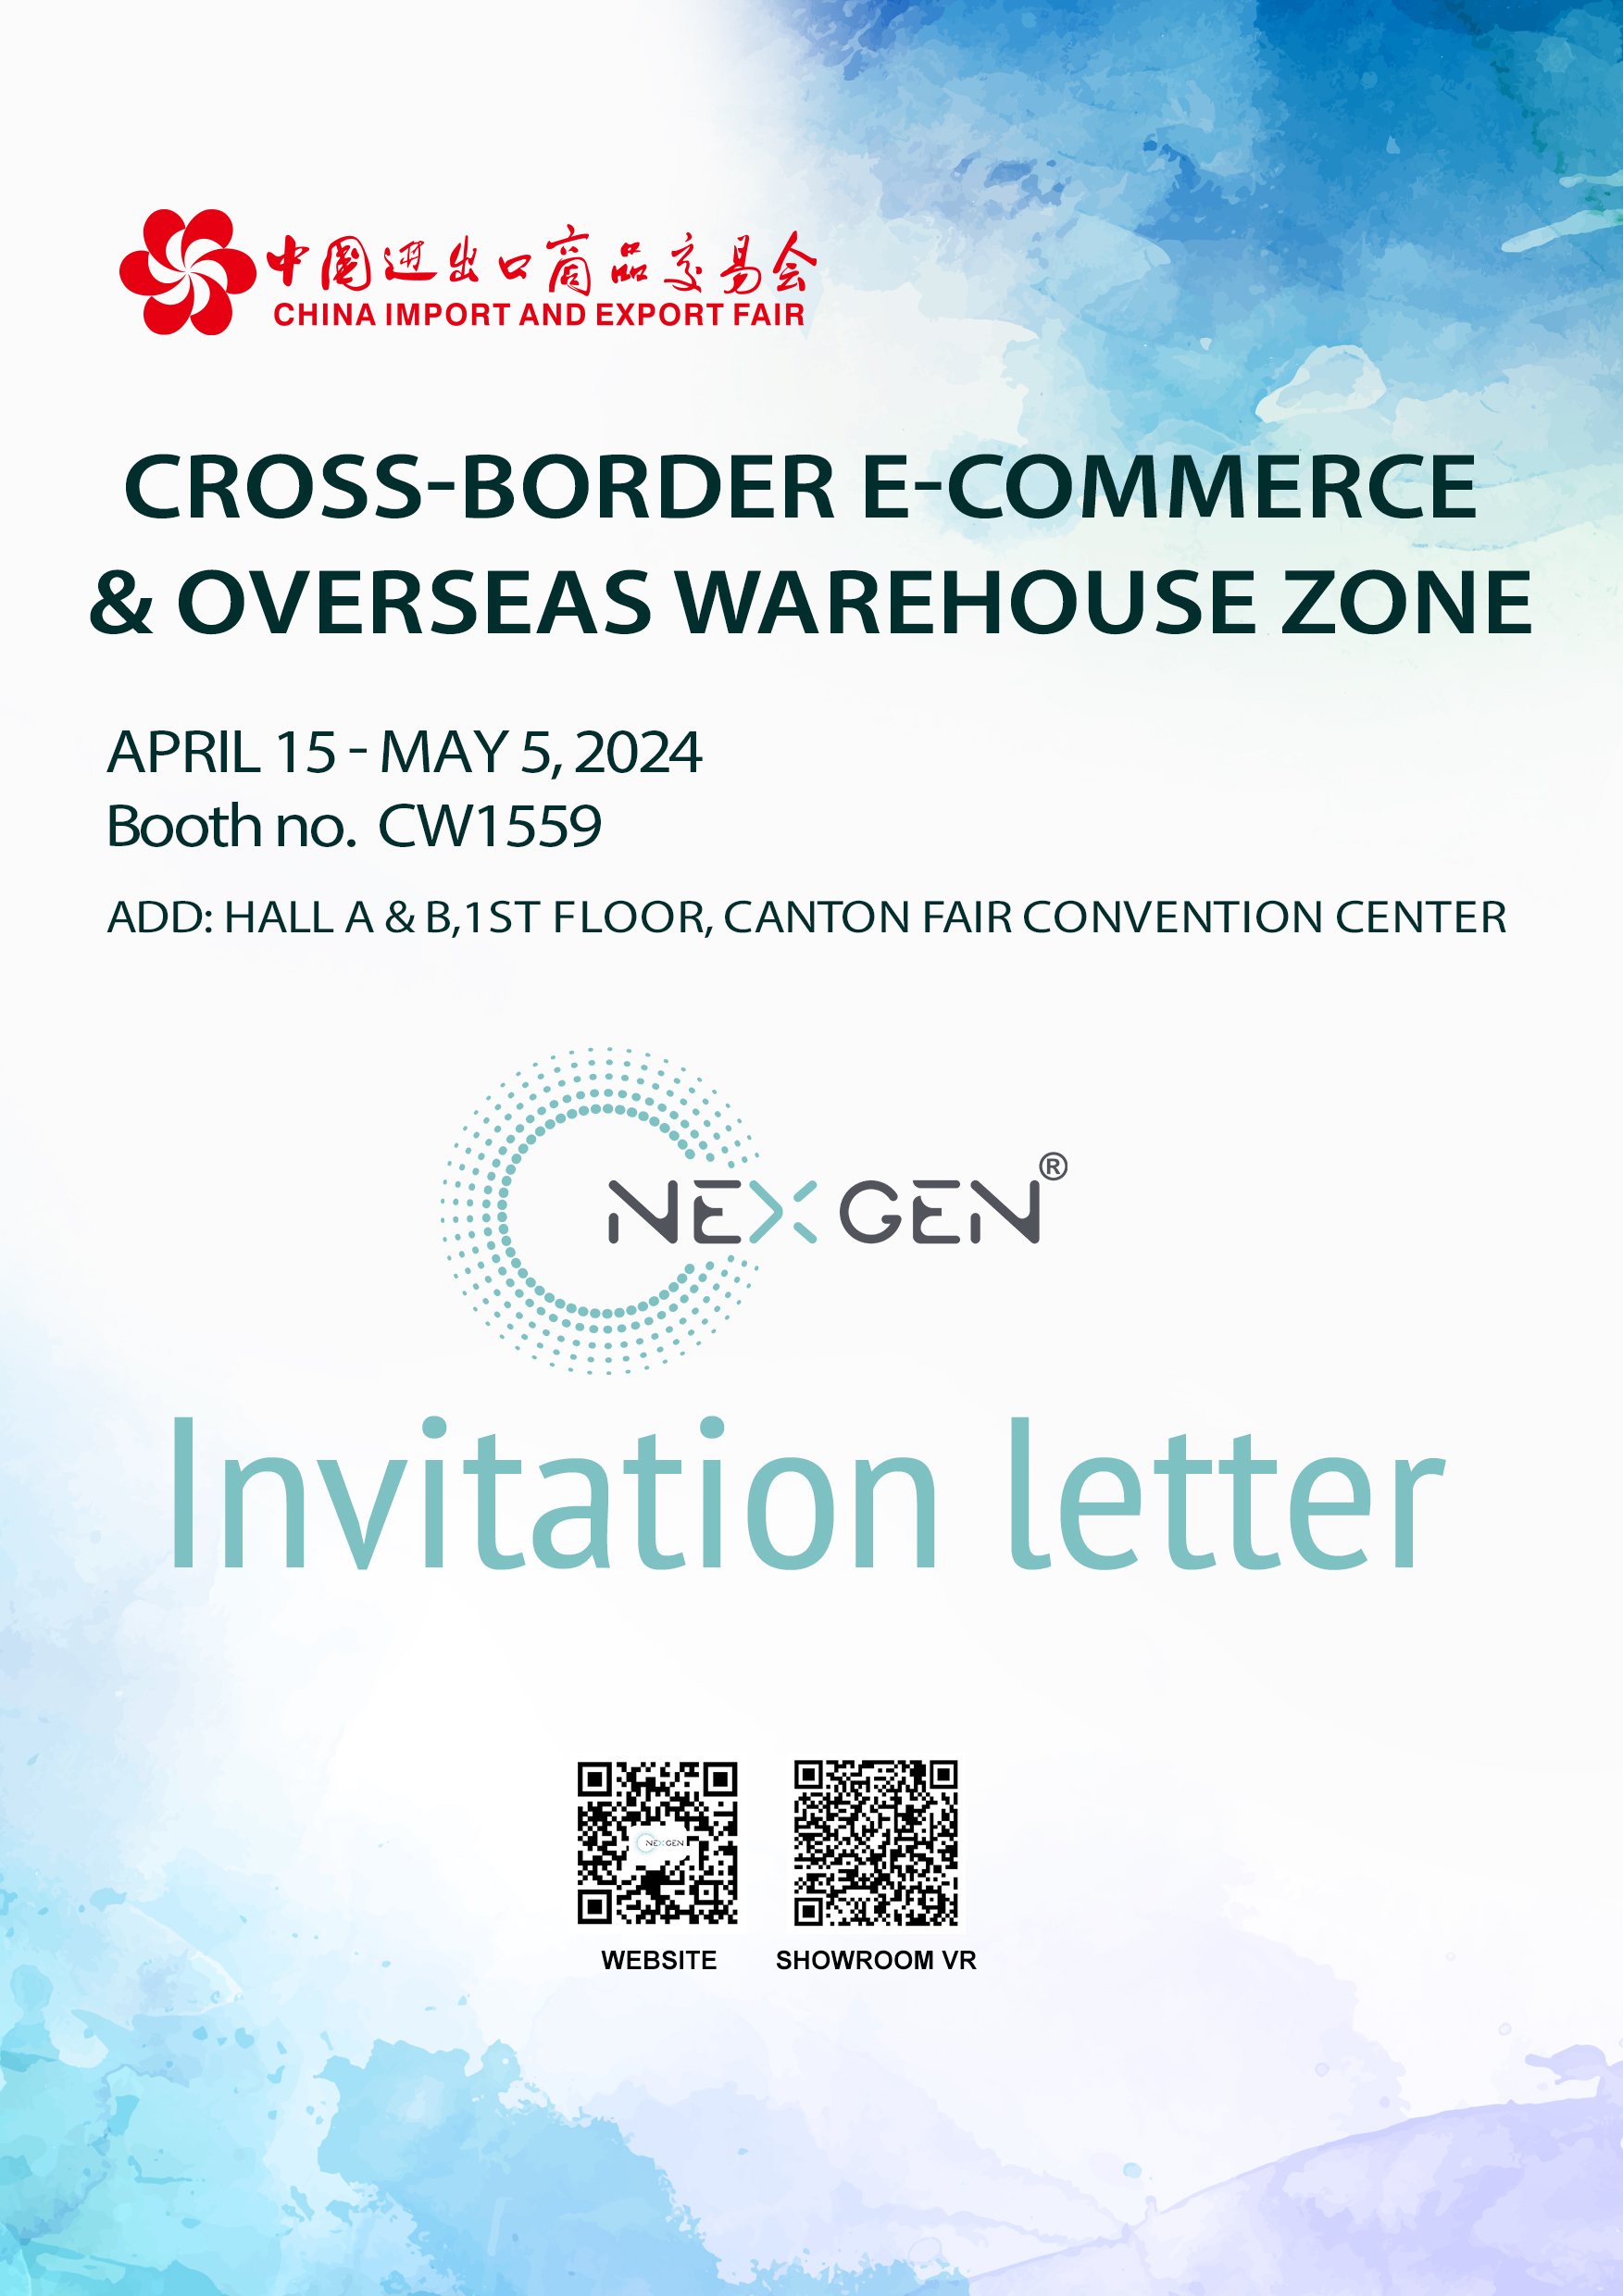 Welcome to our cross-border e-commerce exhibition